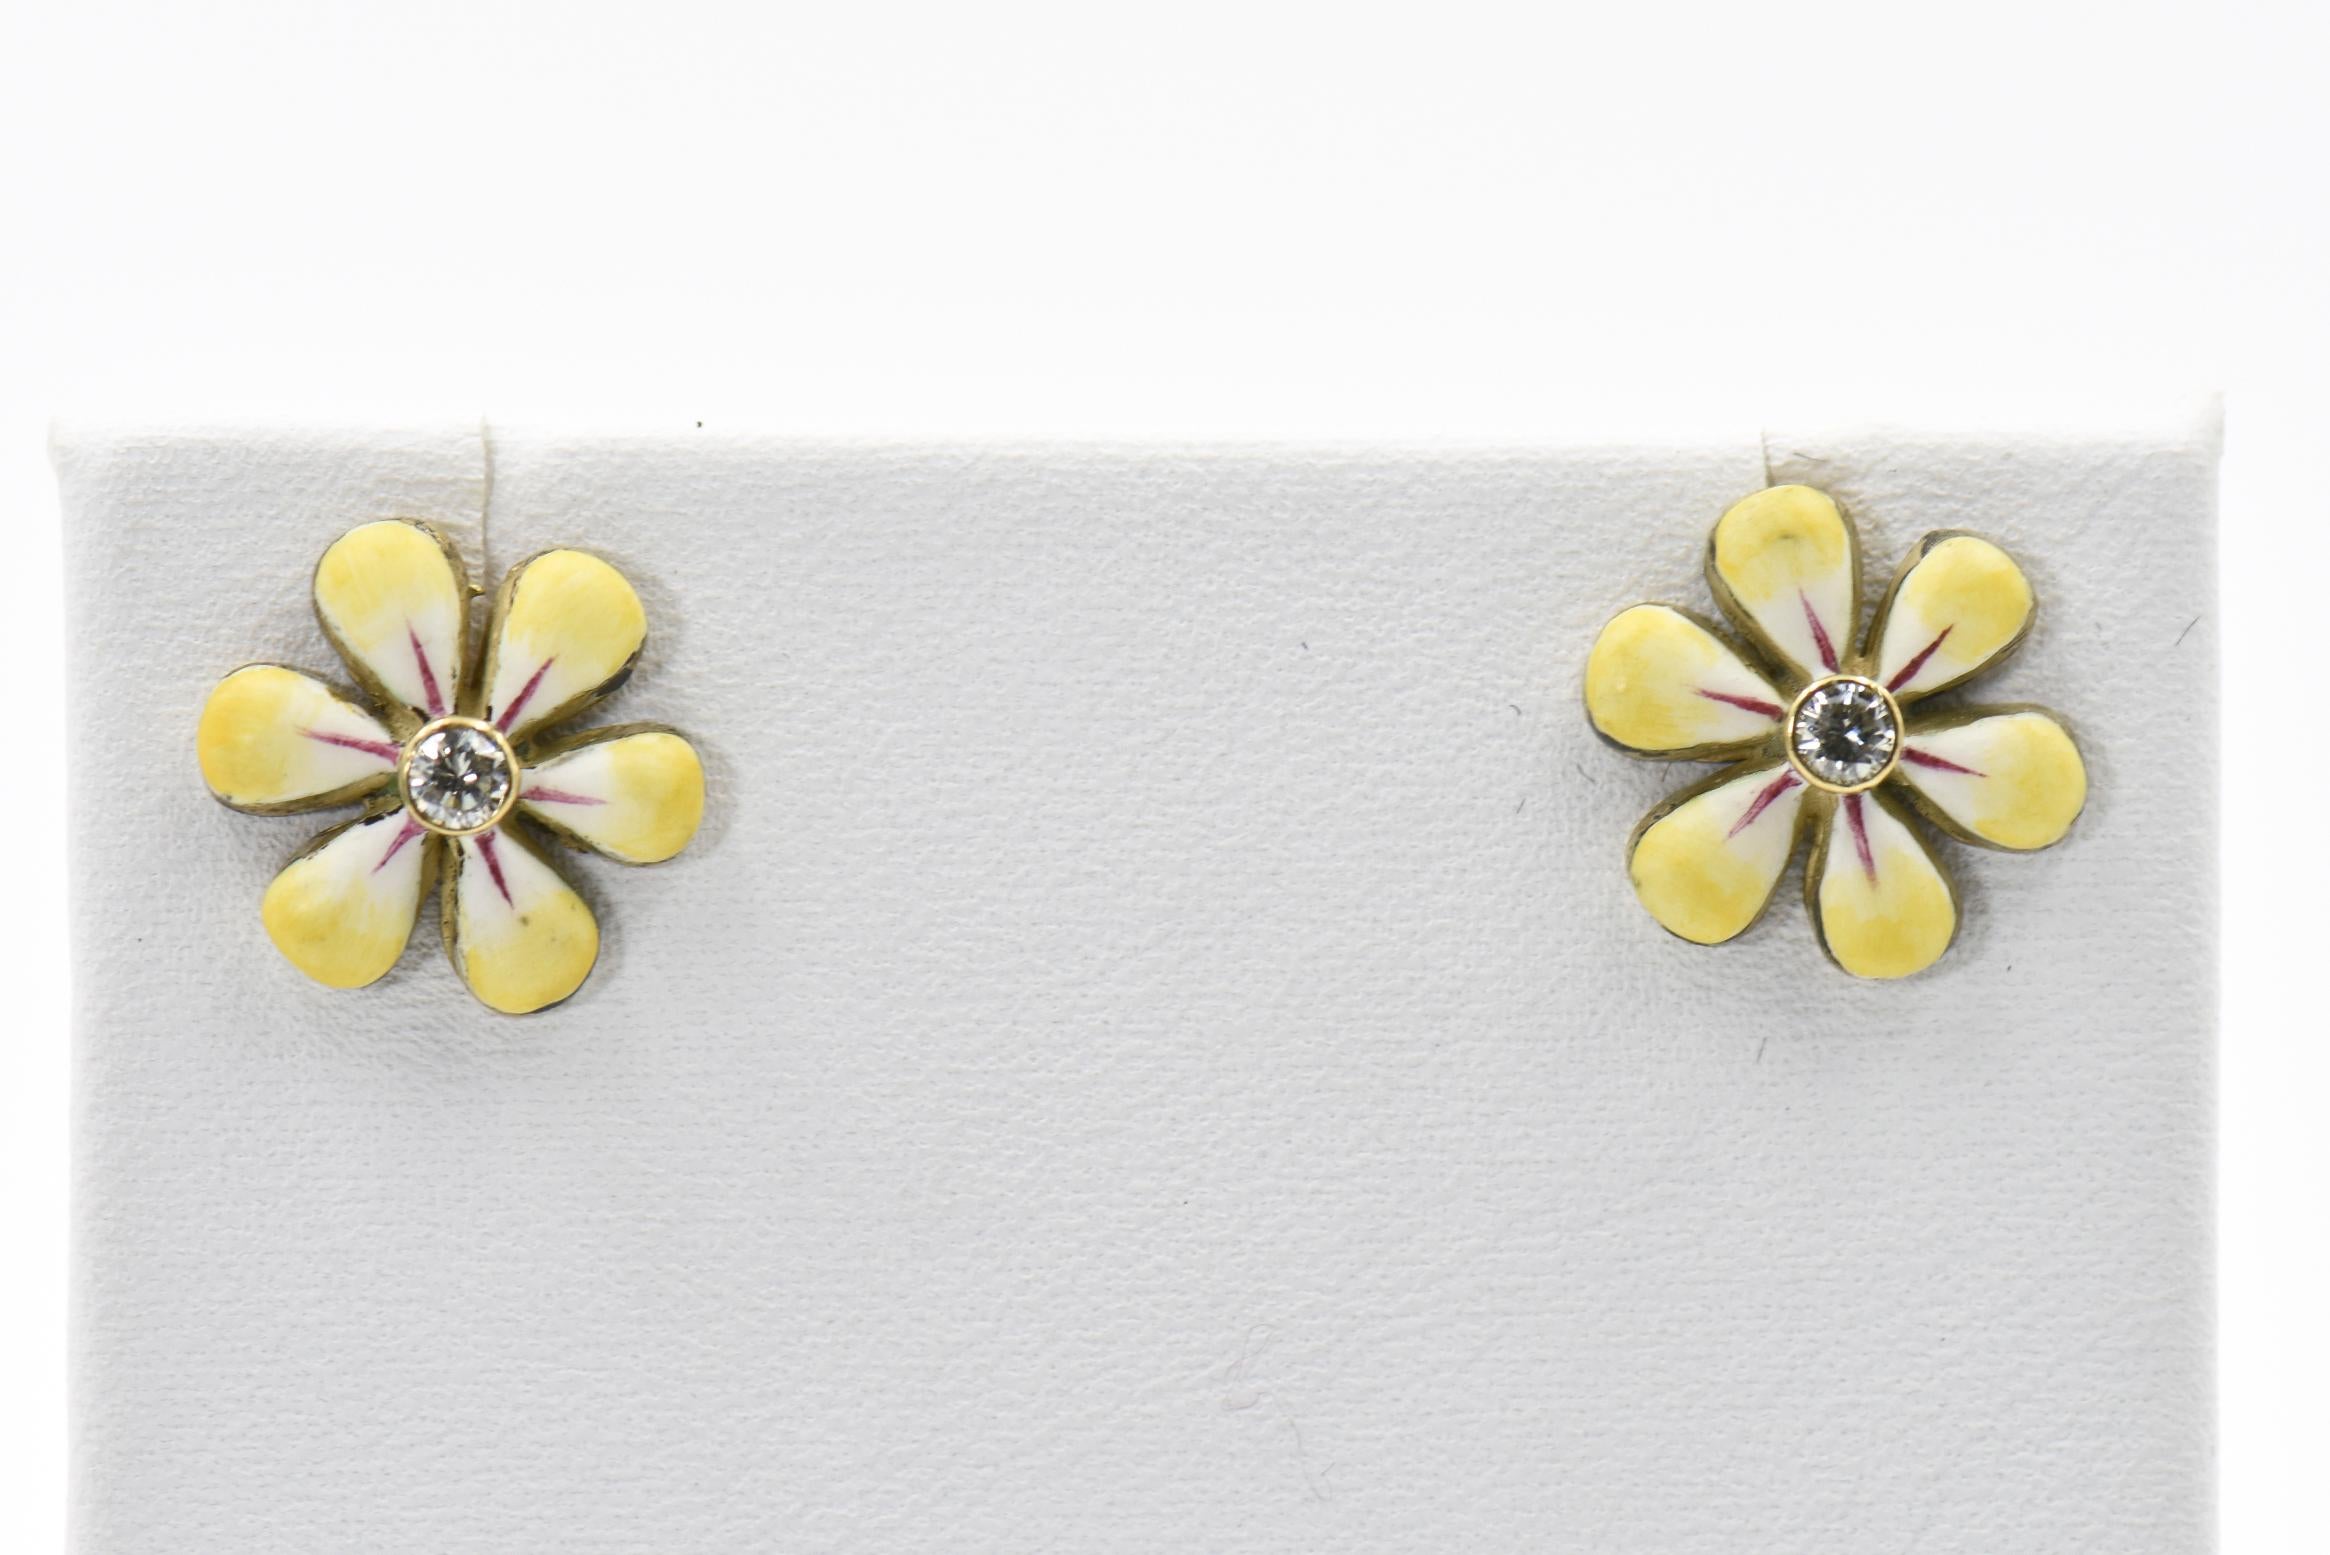 This pair of yellow enamel daisy earrings are part of the daisy line, a beautiful handmade line of jewelry by Sandra J. Sensations. Each flower is hand painted by an enamel artist. The flowers are 14k with diamonds in the center. Each diamond is